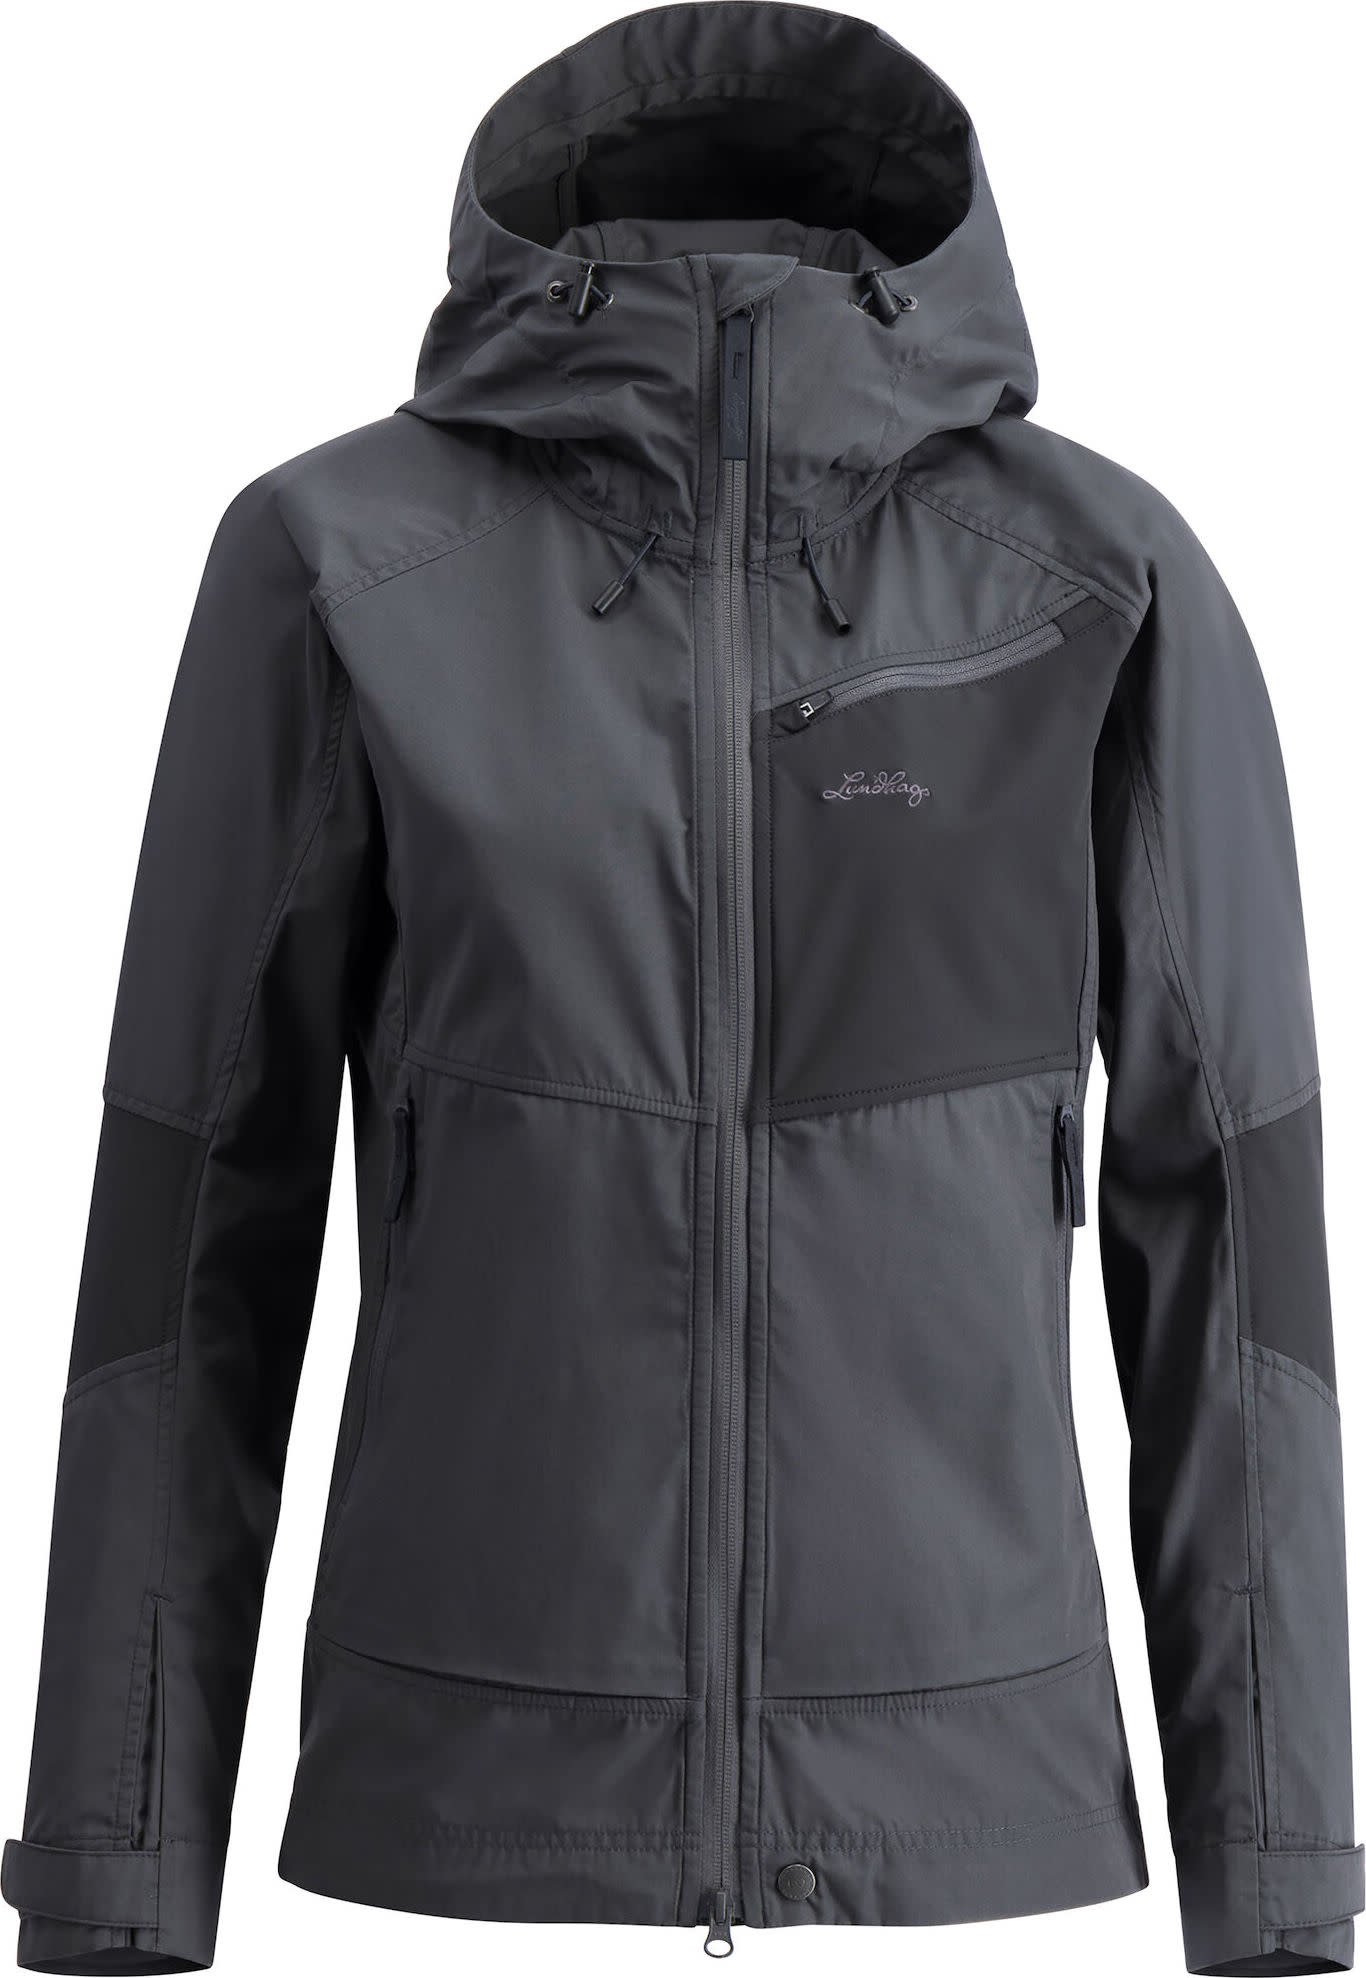 Lundhags Women’s Tived Stretch Hybrid Jacket Granite/Charcoal